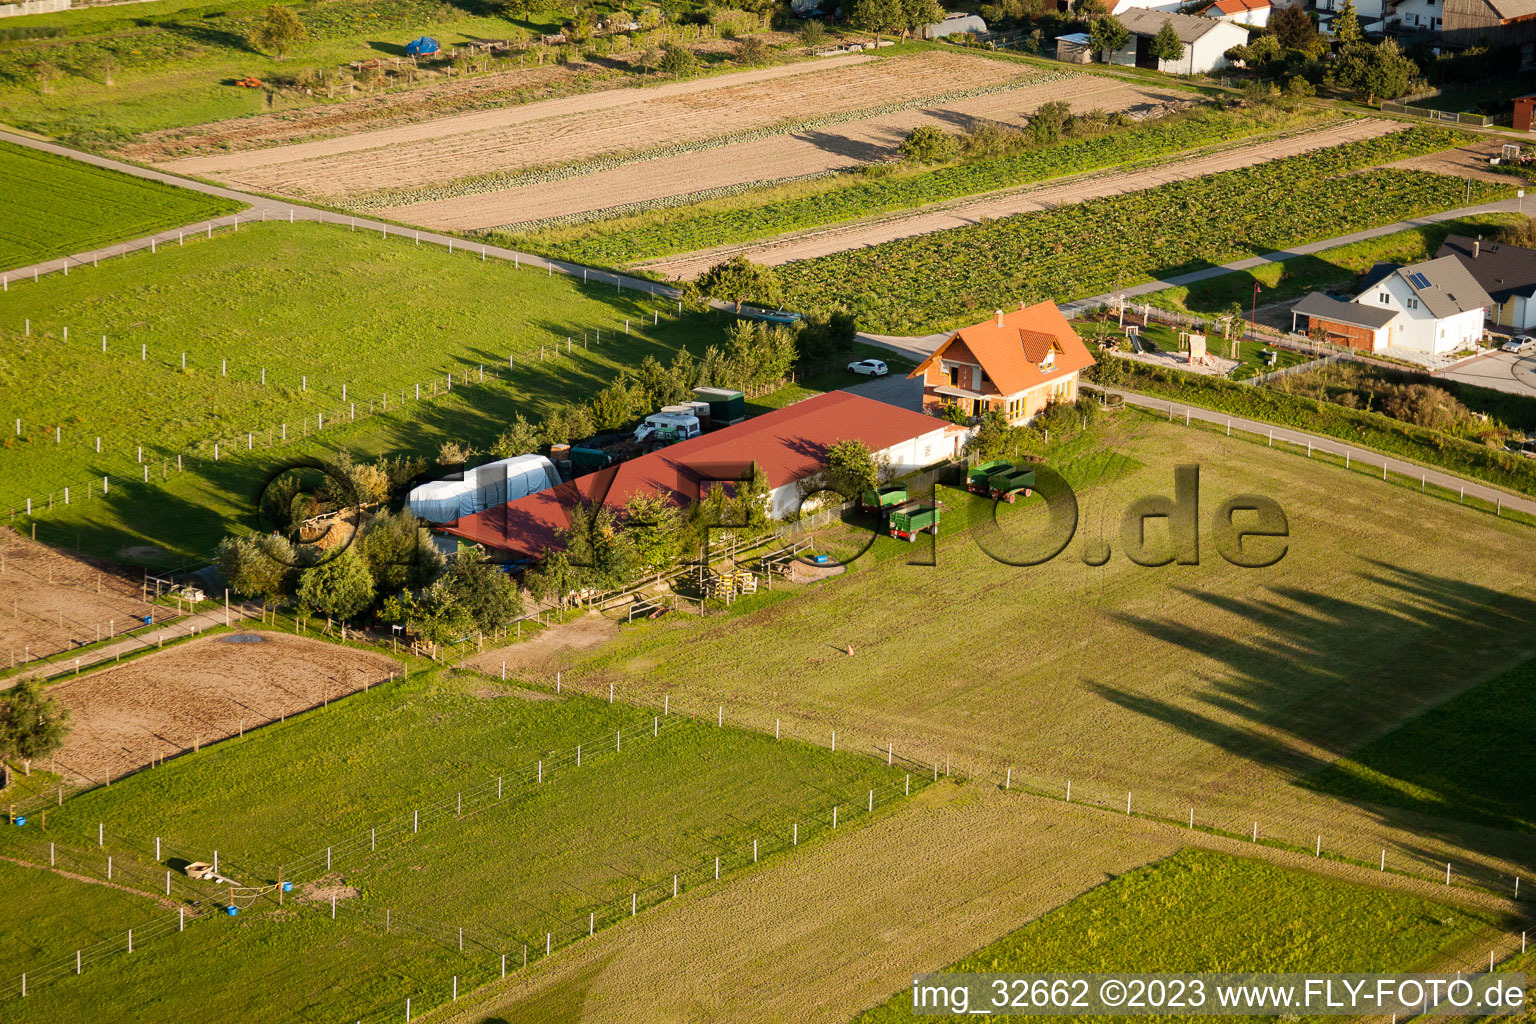 Emigrant farms in Hatzenbühl in the state Rhineland-Palatinate, Germany seen from above